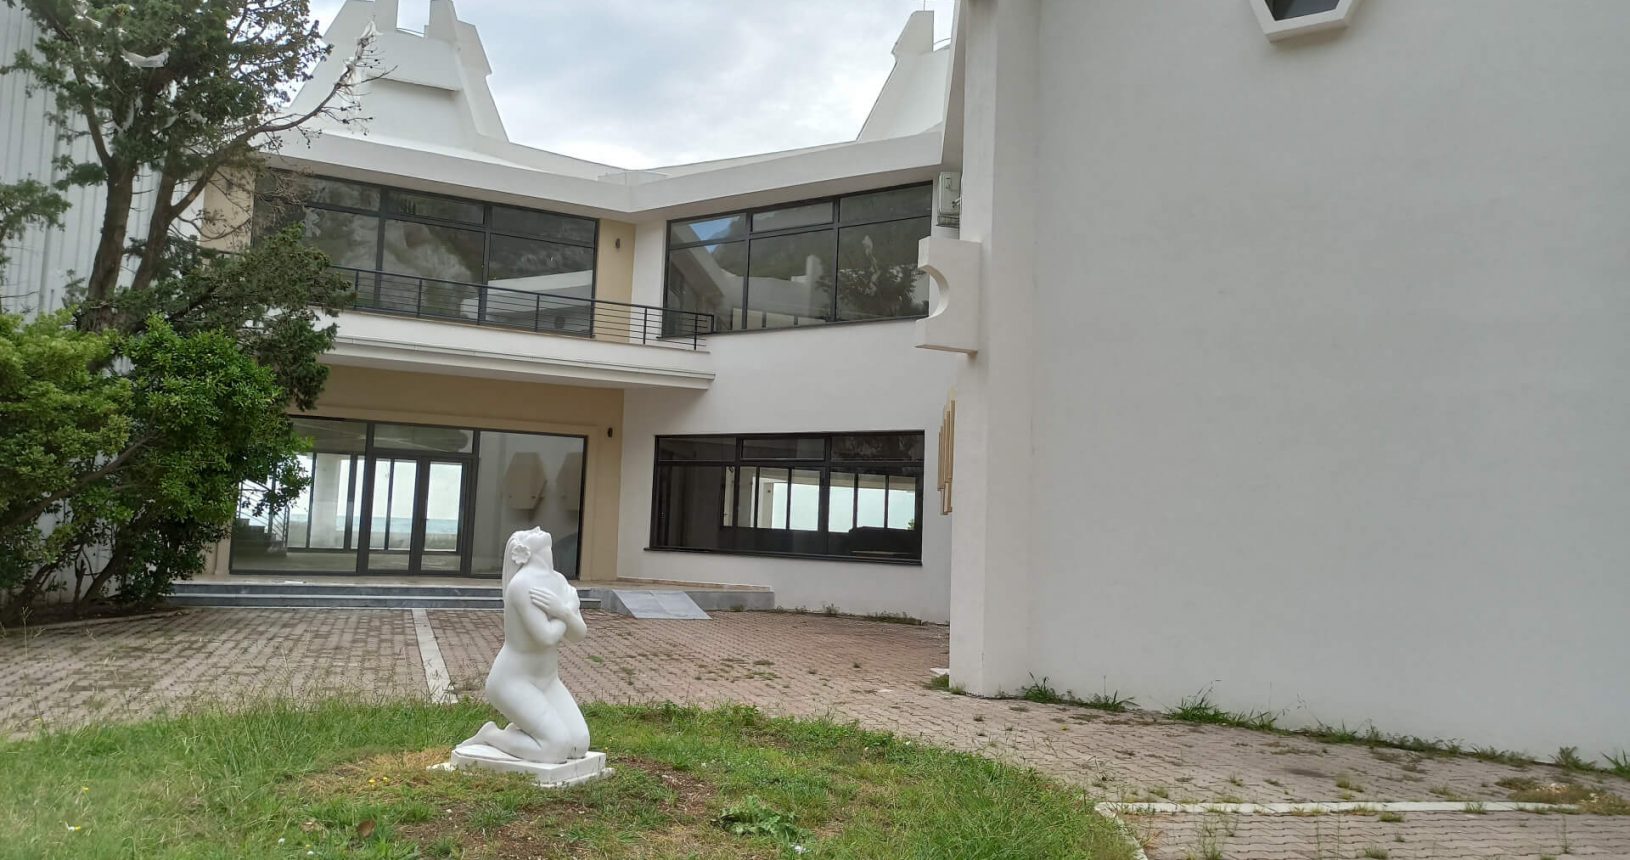 Canj. Hotel with sculptures